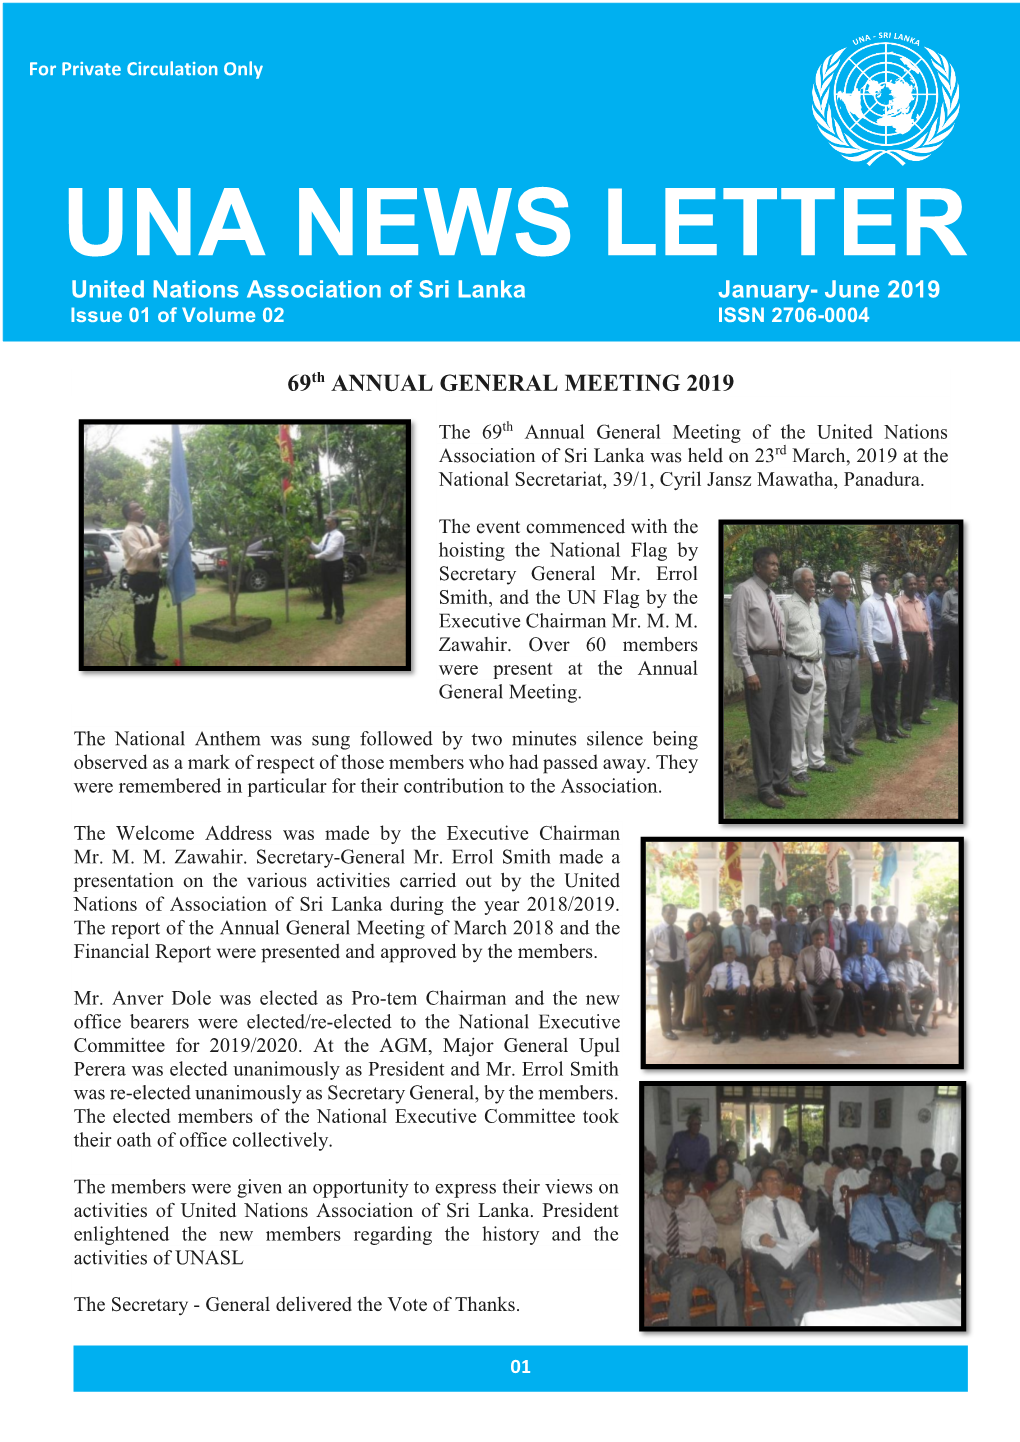 UNASL - NEWS LETTER January- June 2019 for Private Circulation Only